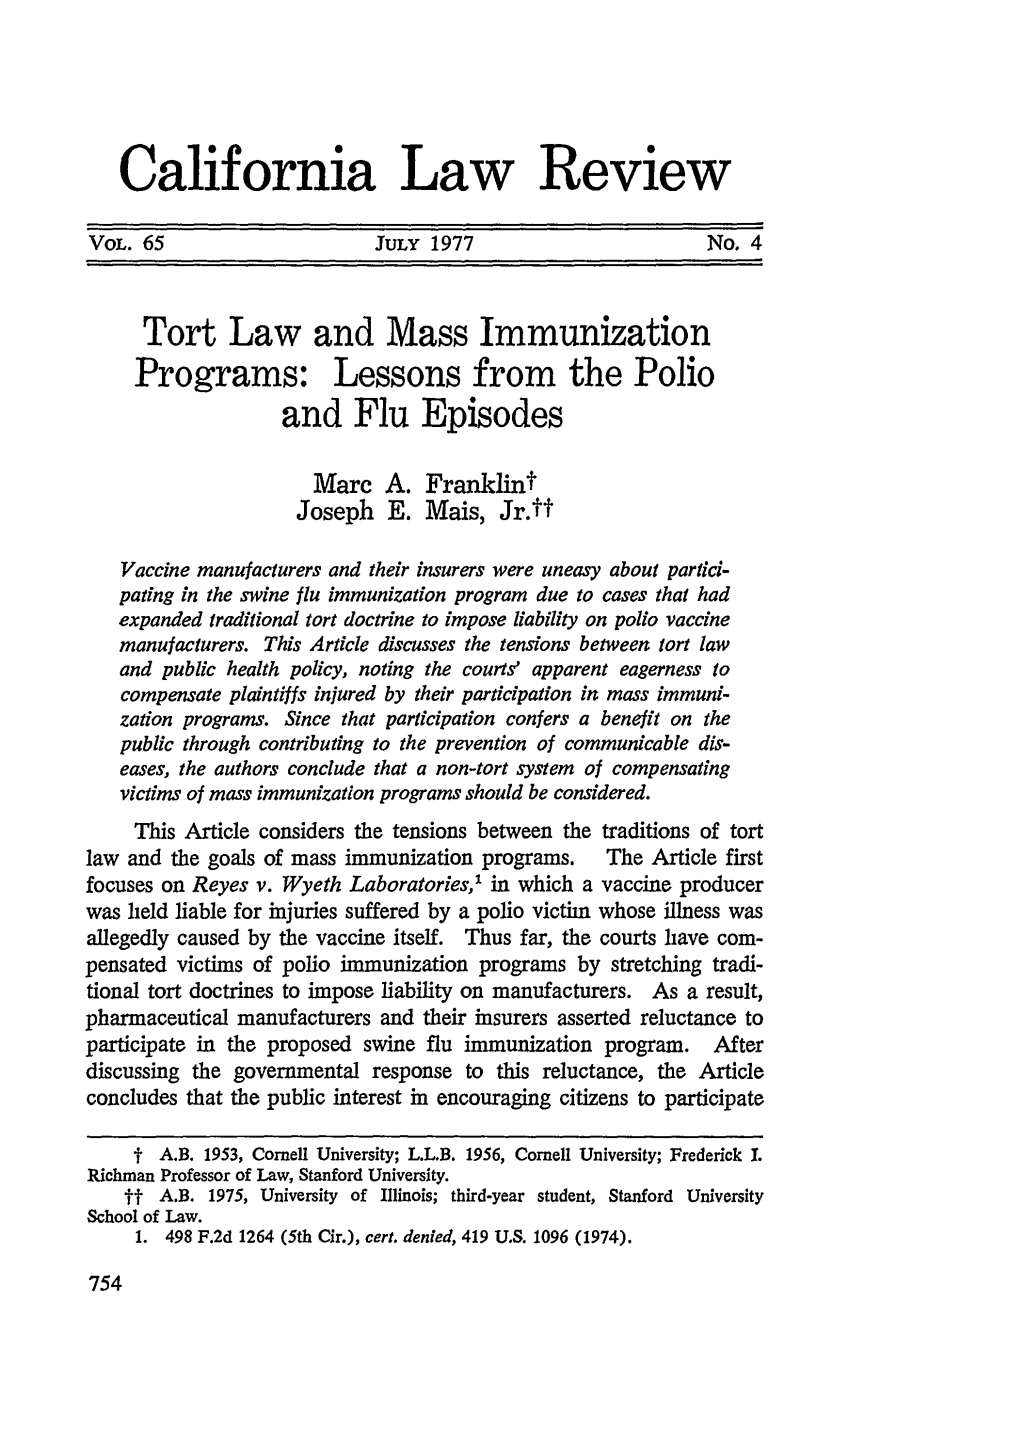 Tort Law and Mass Immunization Programs: Lessons from the Polio and Flu Episodes